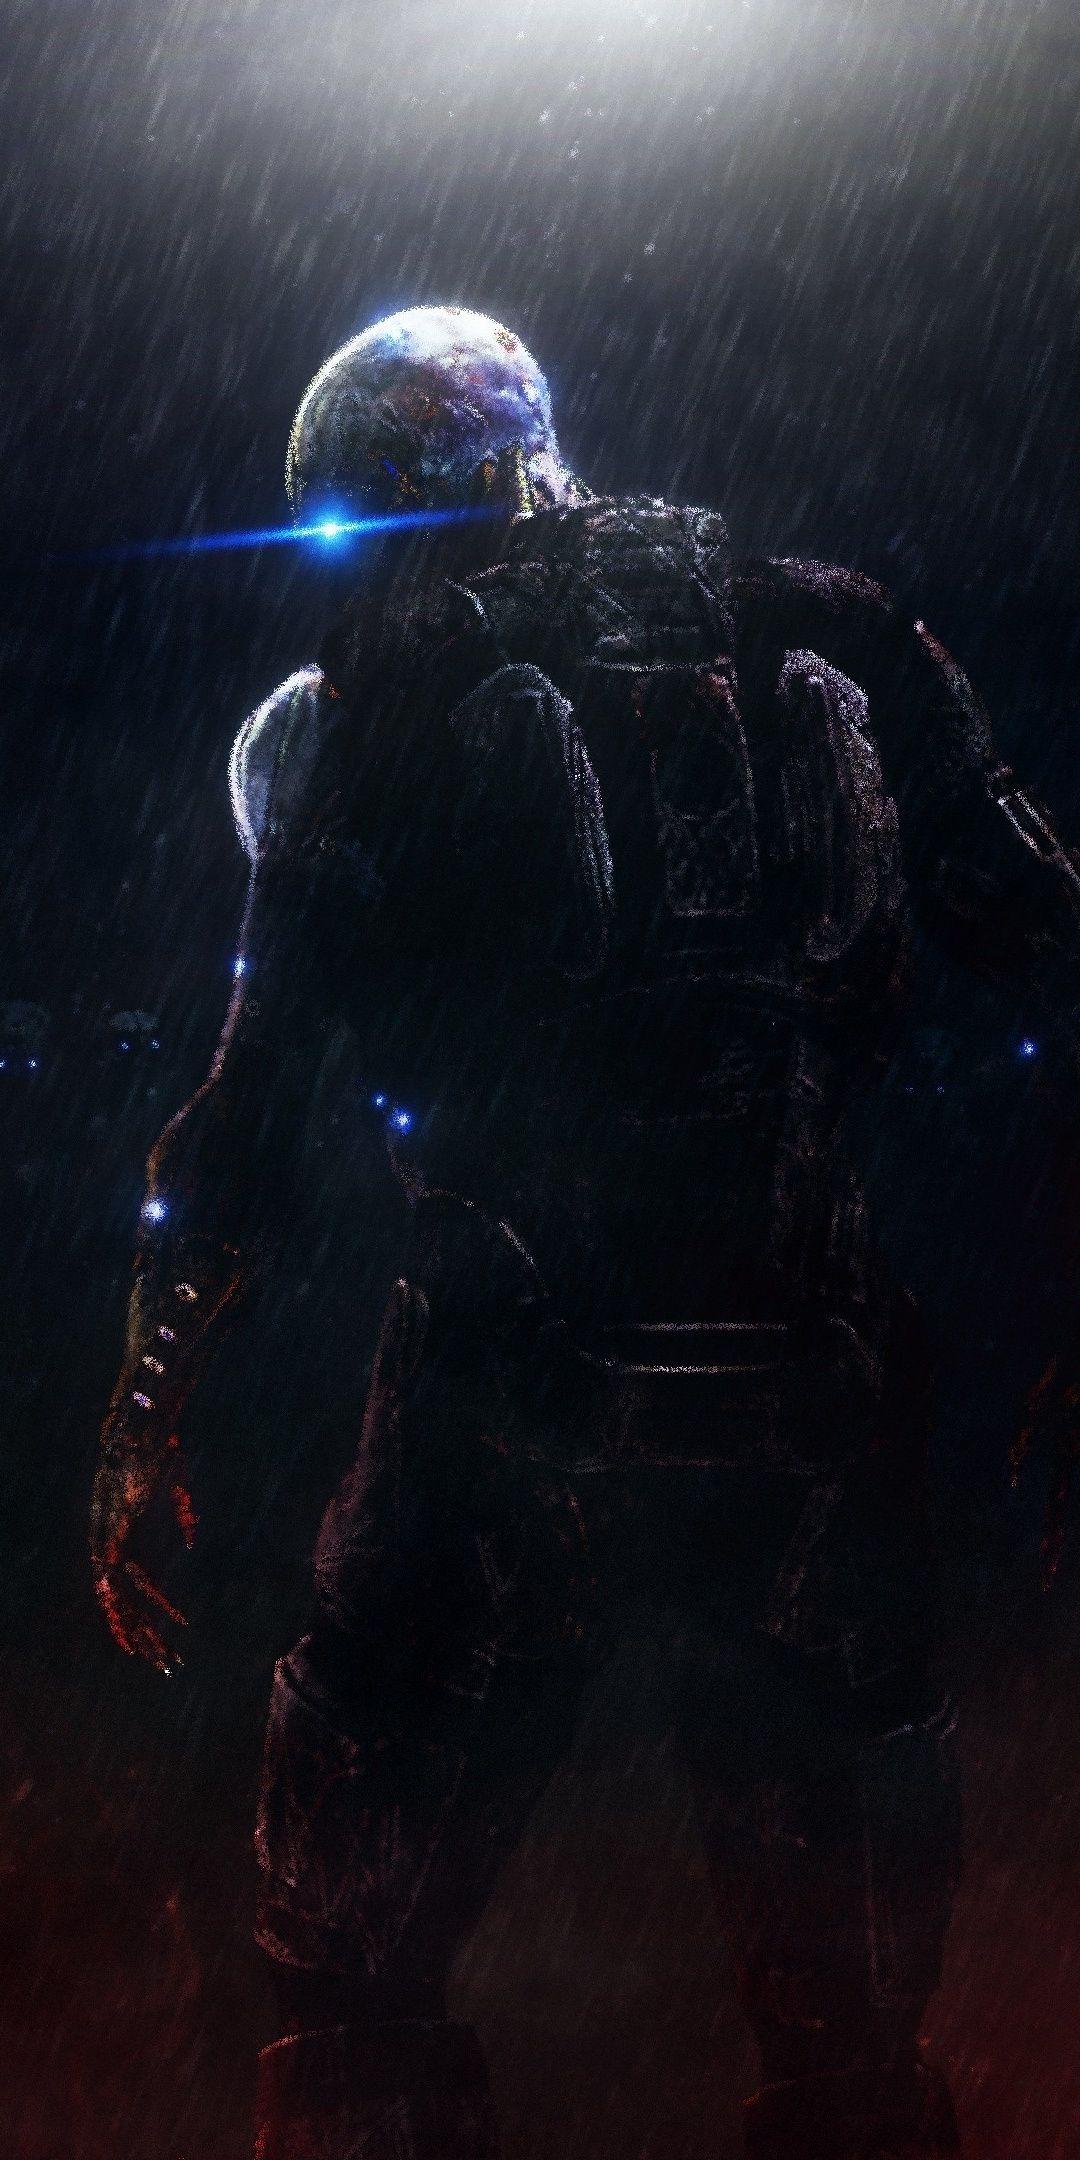 Dark, Ascension, Mass Effect Trilogy, video game, soldiers, art